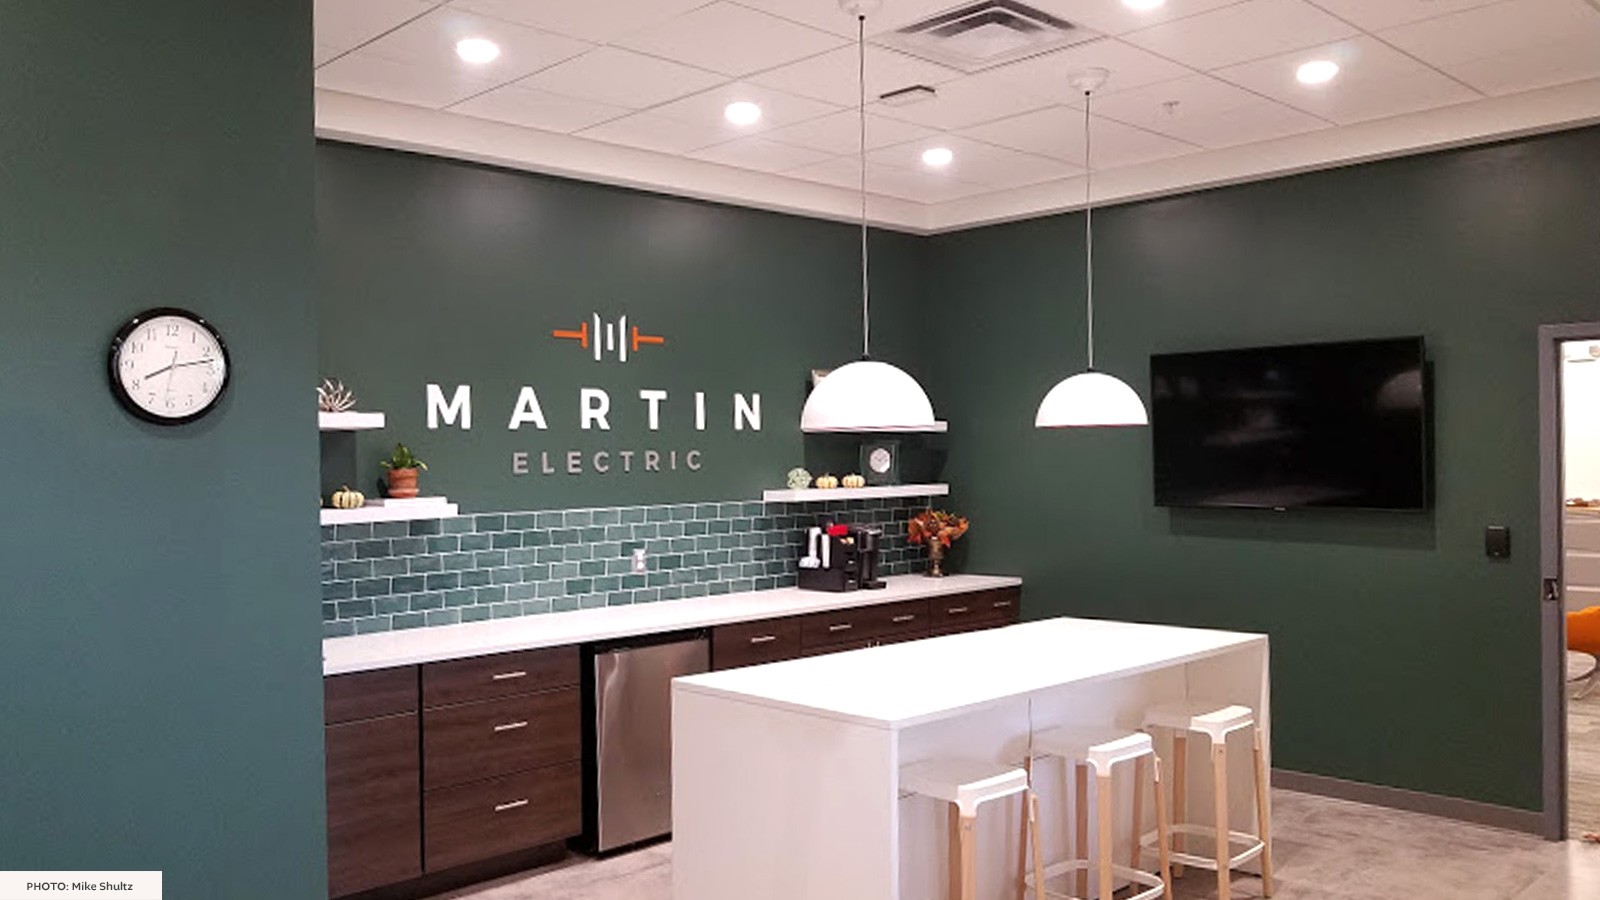 Martin Electric | Inetrior wall with logo